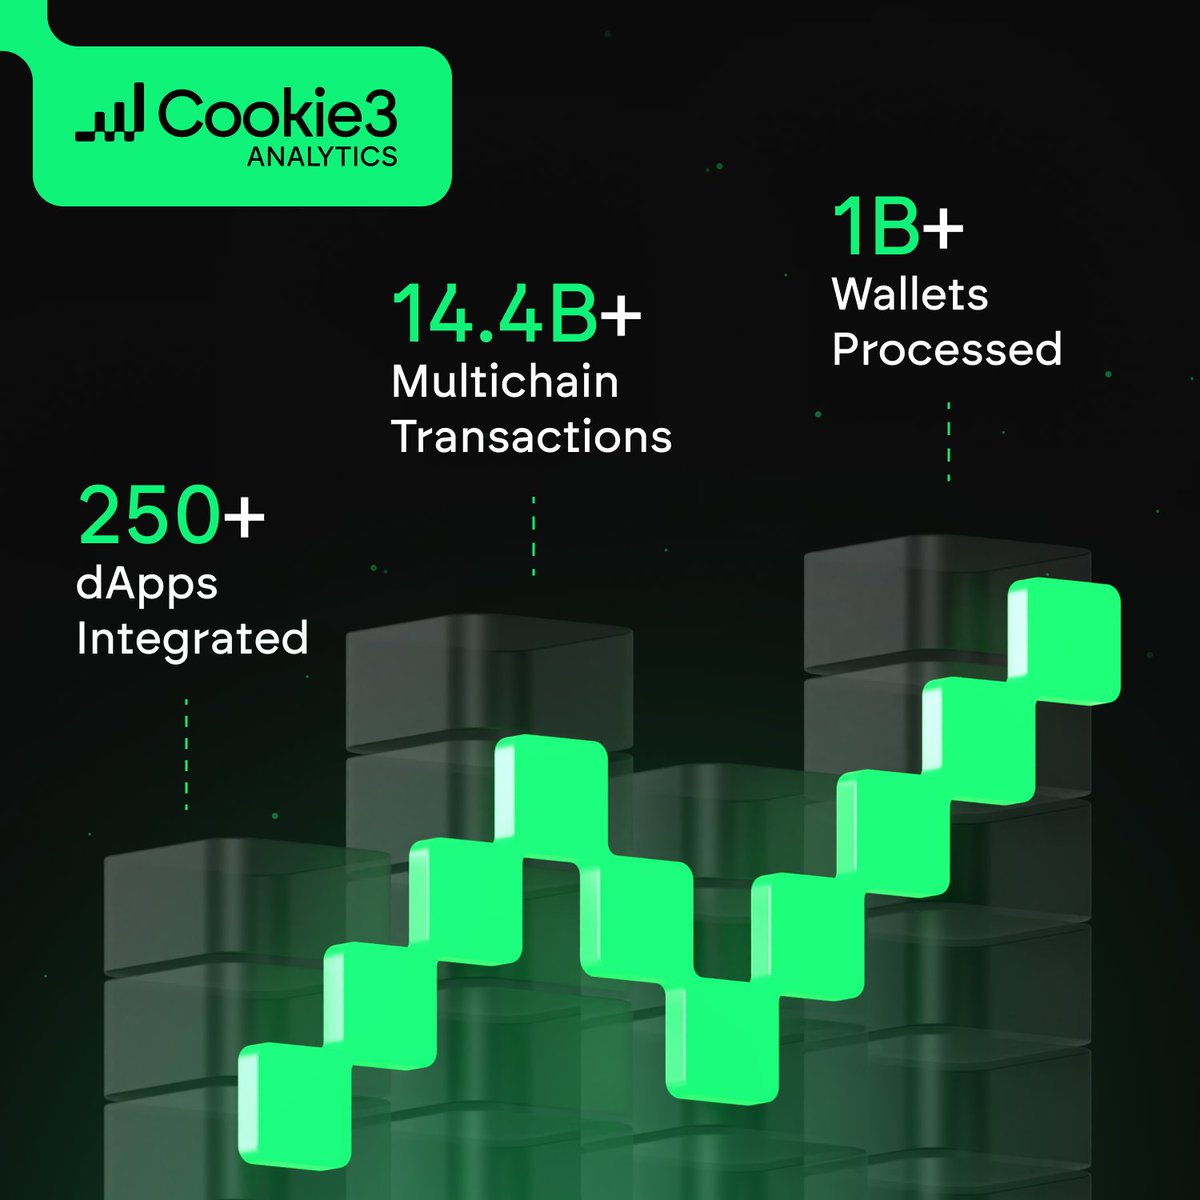 🍪 250+ dApps Integrated
🍪 14.4B+ Multichain Transactions Analyzed
🍪 1B+ Wallets Processed 

This massive dataset fuels Cookie3's innovative solution: Multi-Airdrop Access 🪂